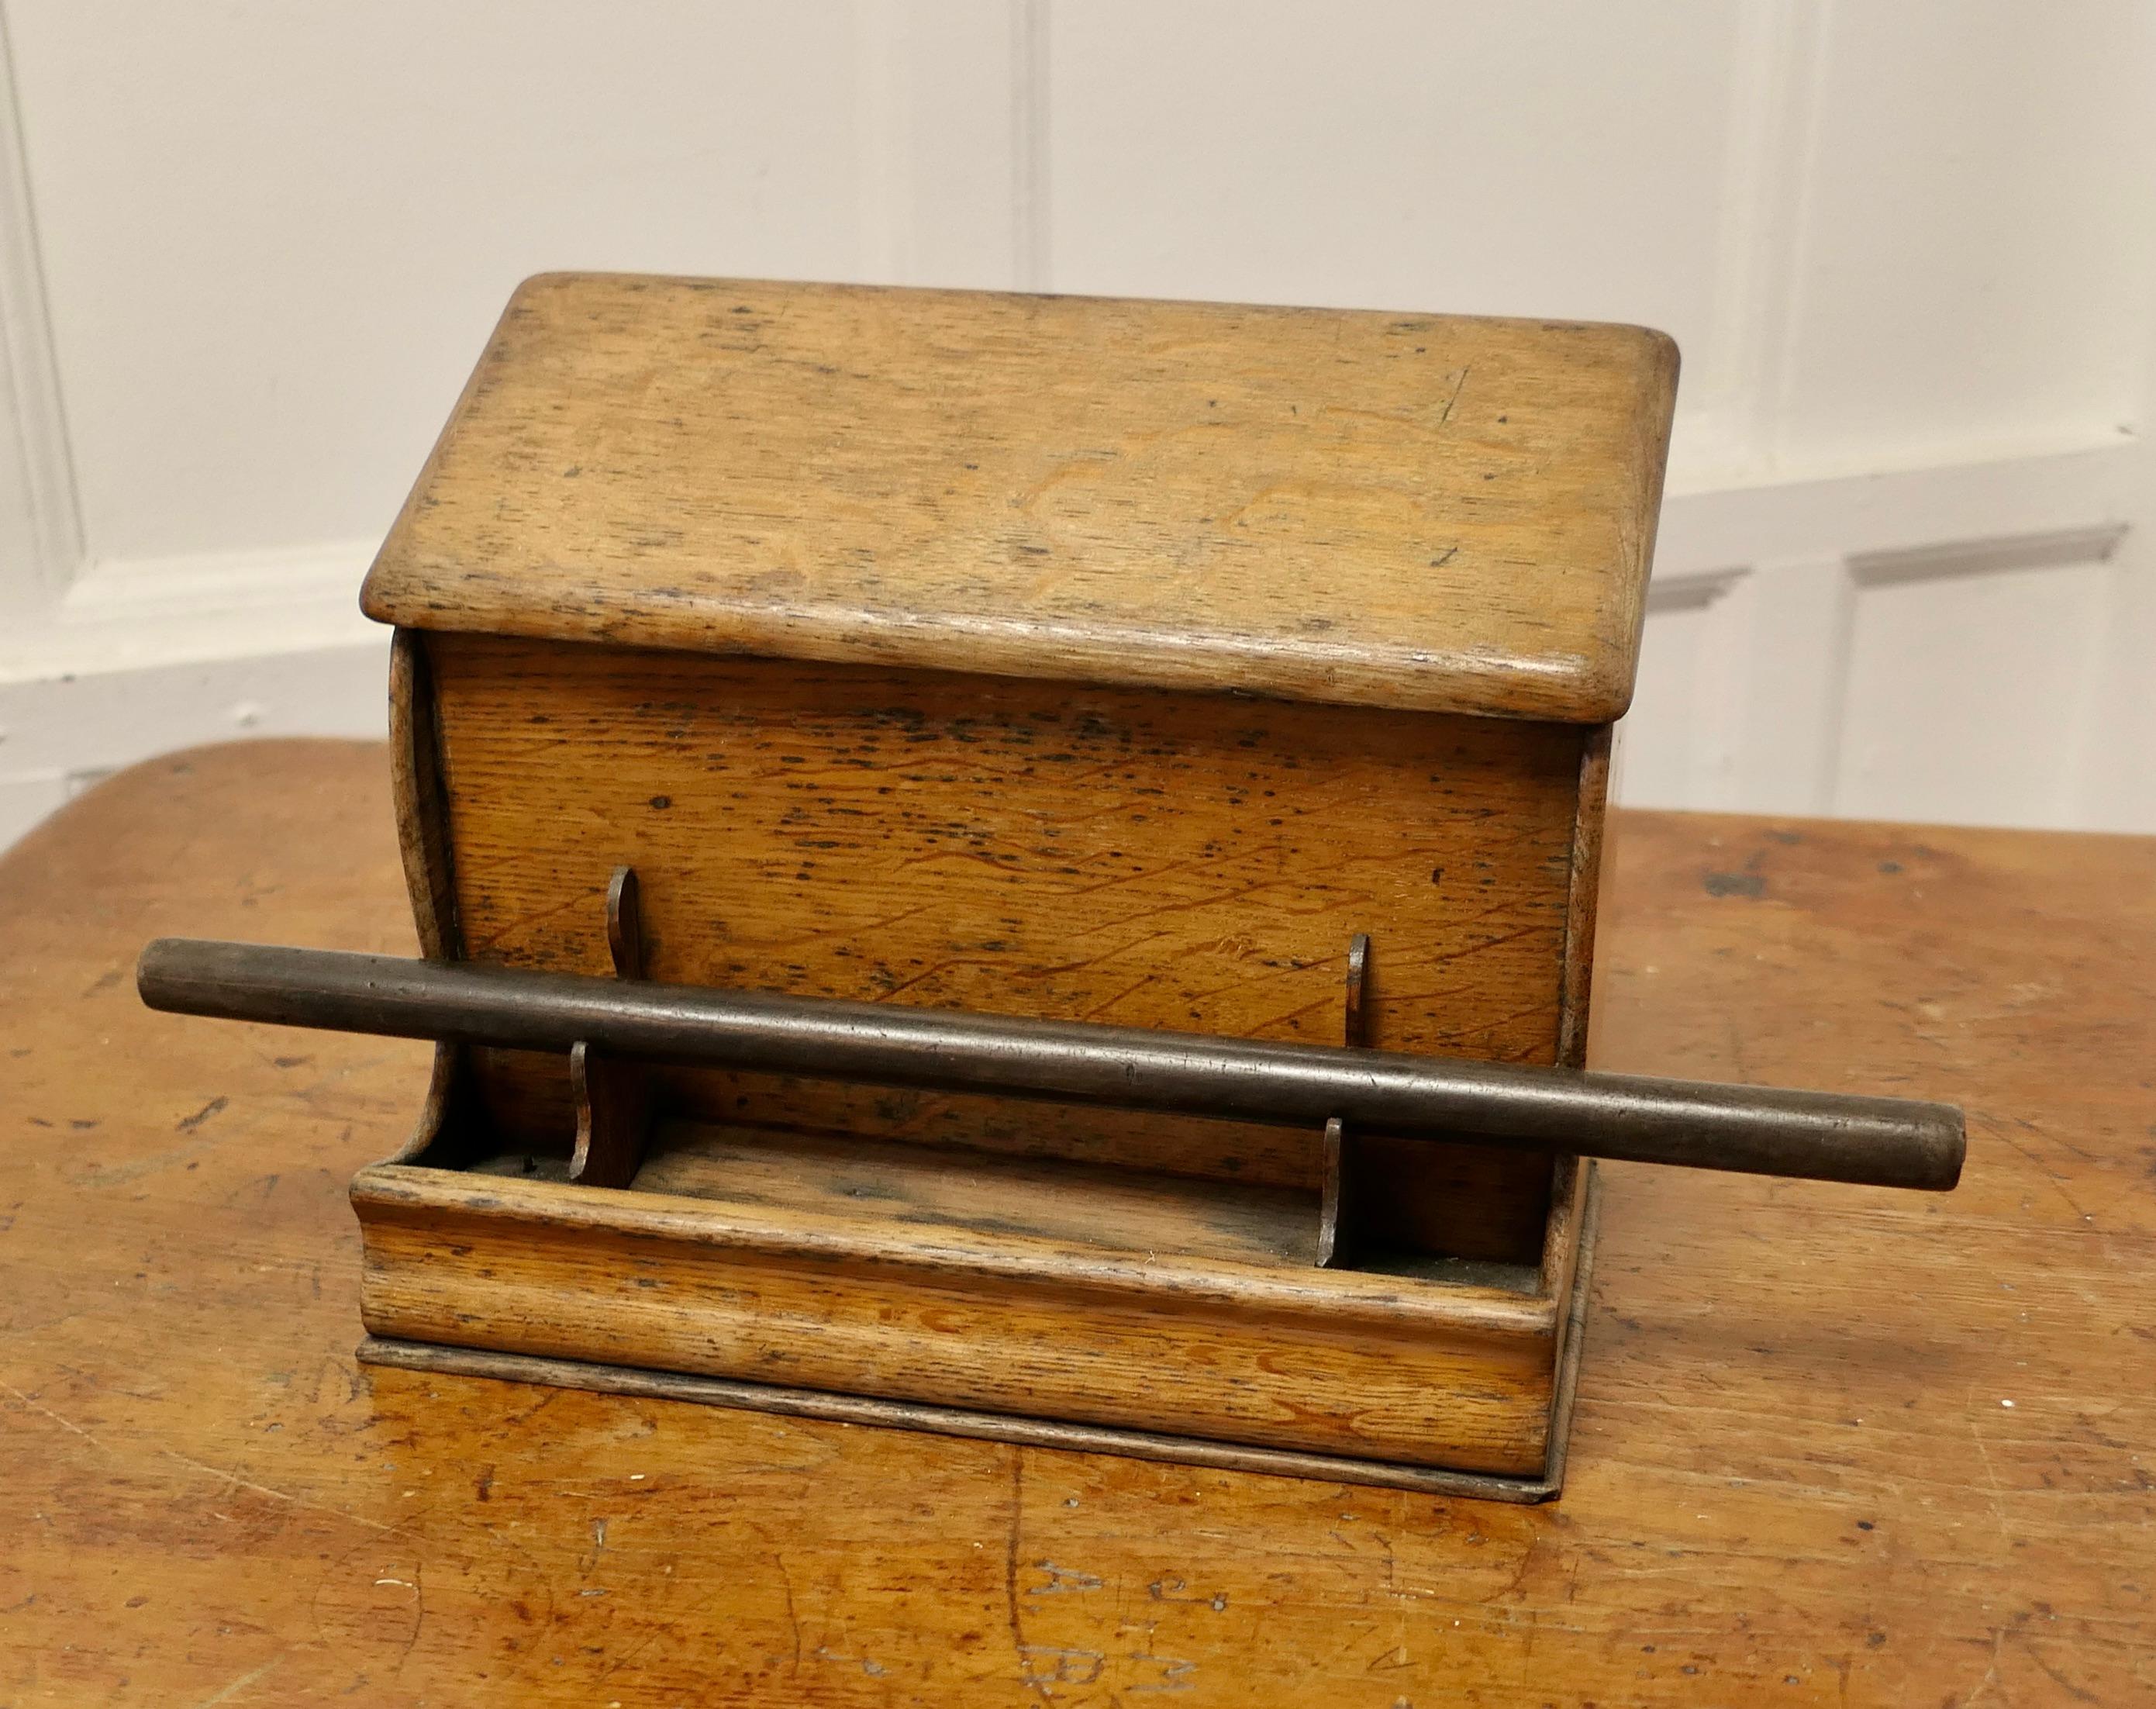 A Good Old Oak Stationary or Letter Box, with pen Holder

This is a very useful piece, the box is made in oak, it has 6 graduated letter compartments inside and a pen or ruler holder on the front
 
The Box is 12” wide, it is 10” high and 7”